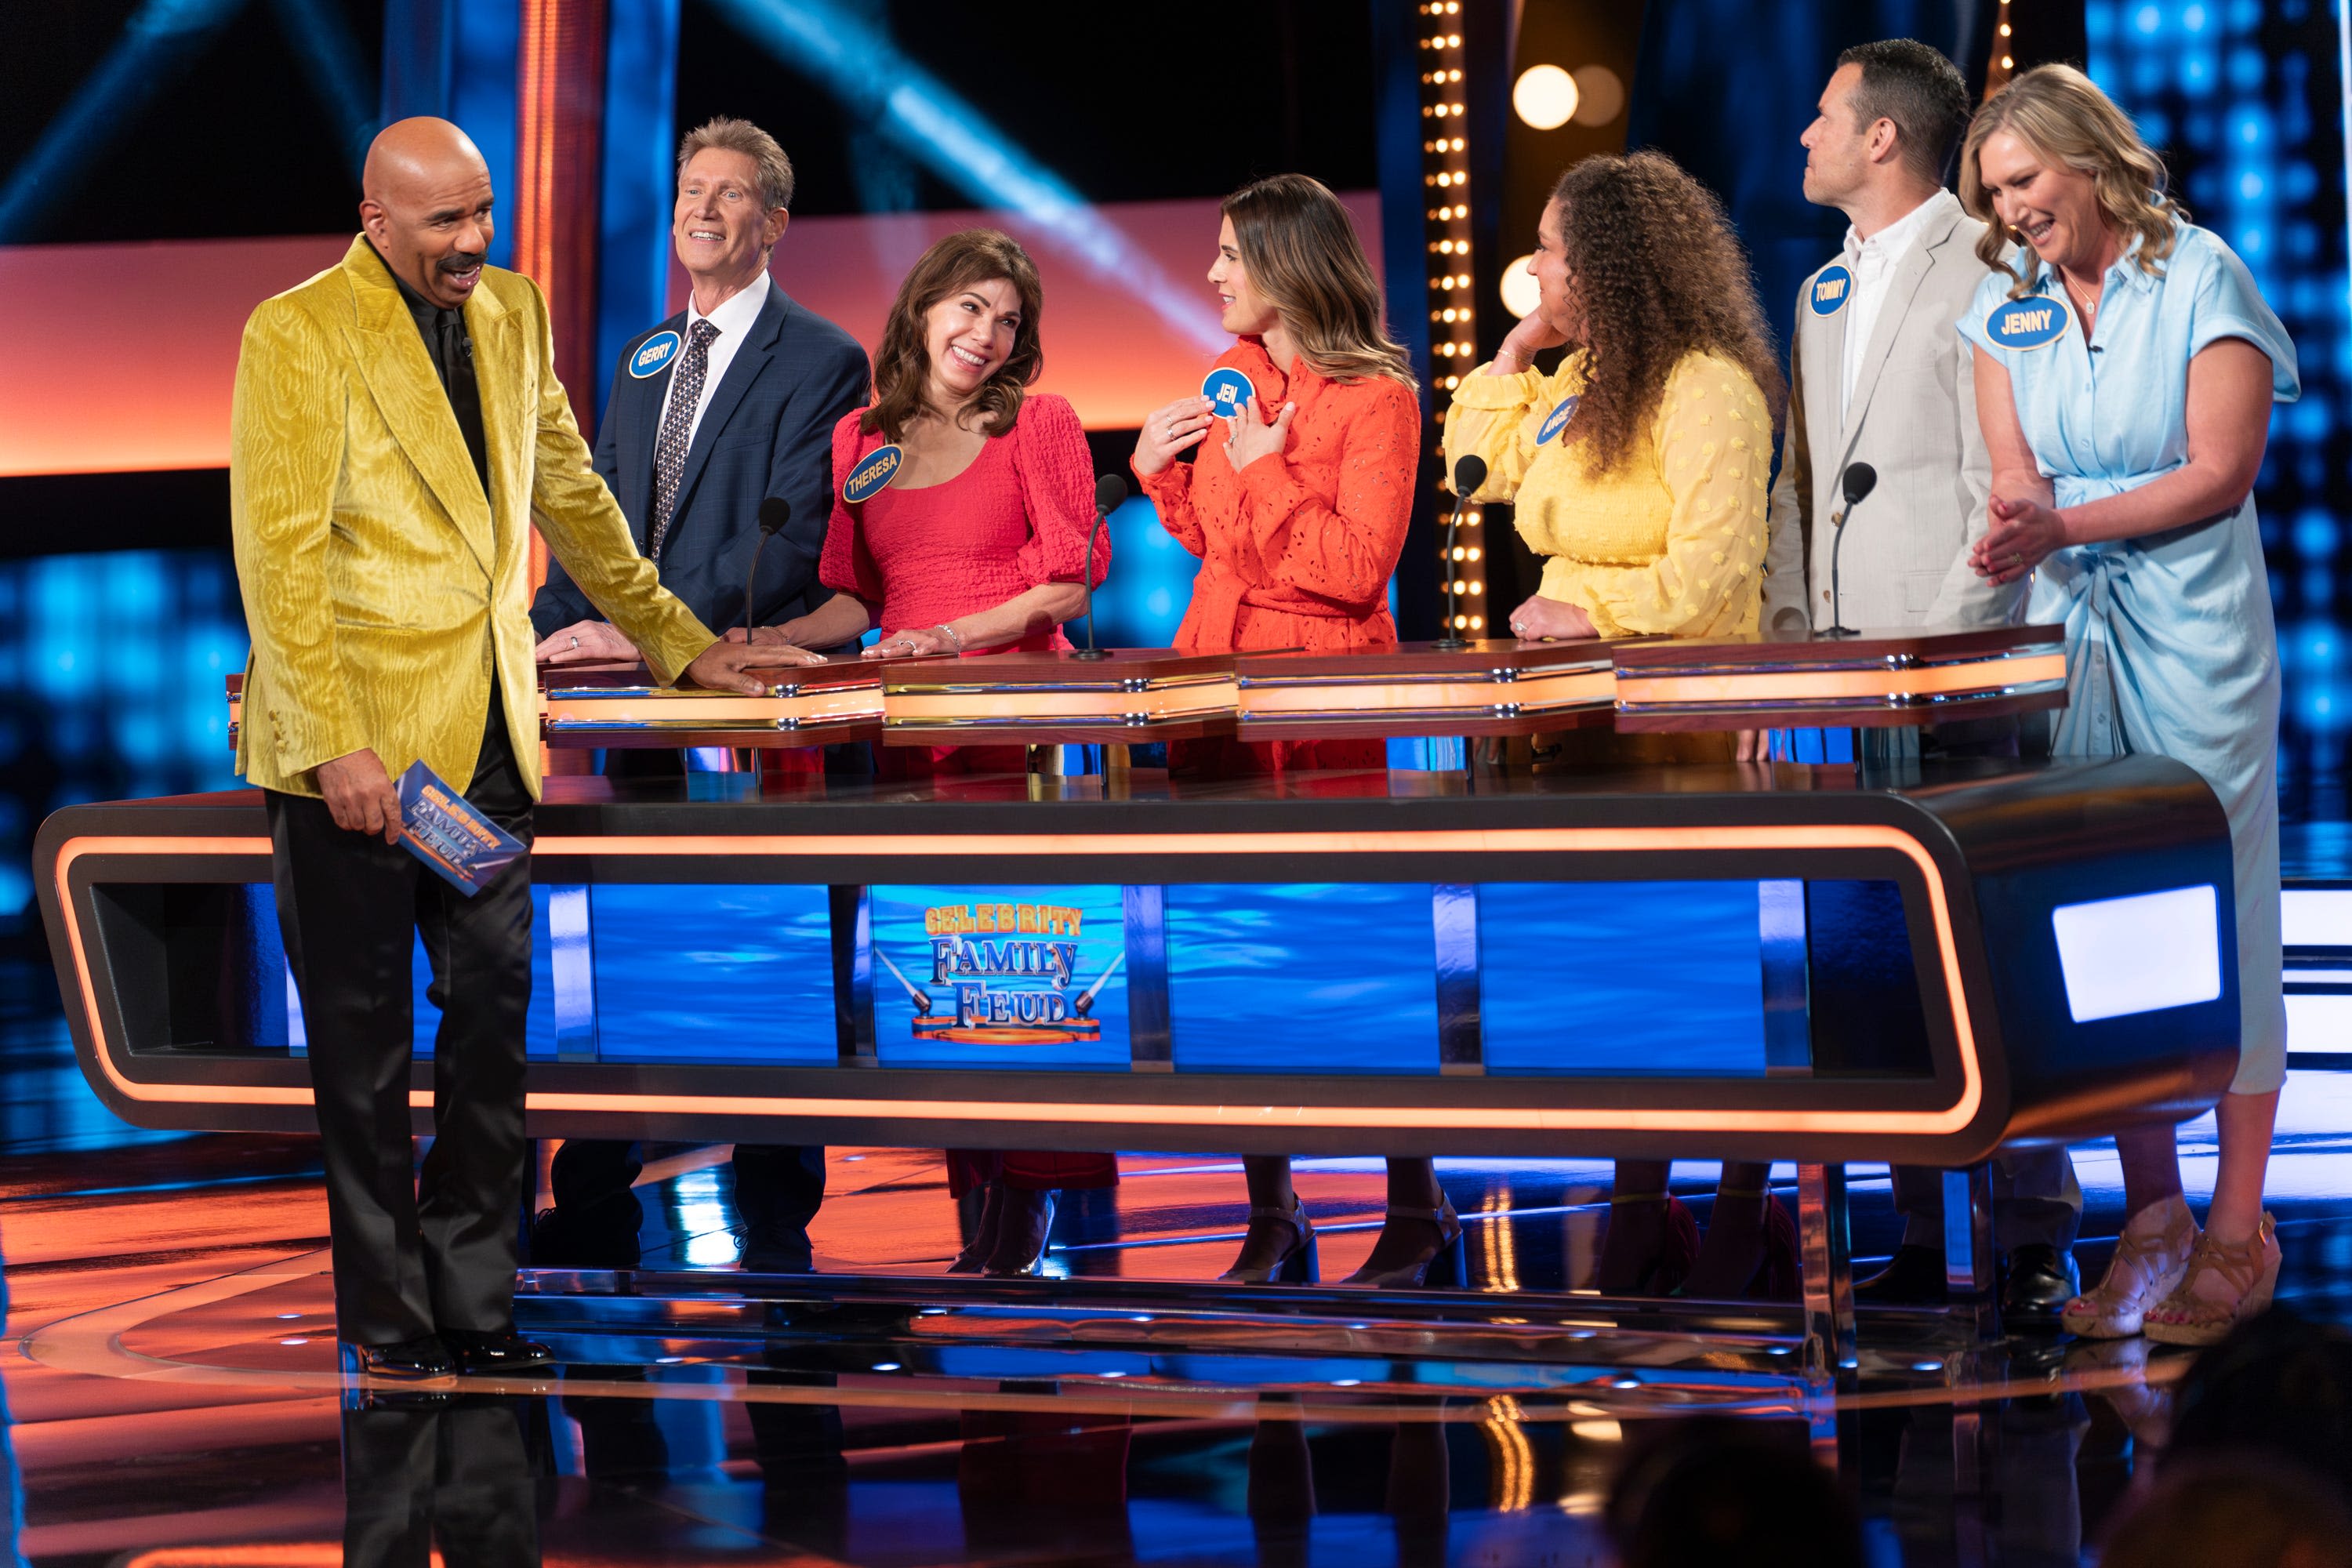 See 'Golden Bachelor' and Iowan Gerry Turner and Theresa Nist on 'Celebrity Family Feud'